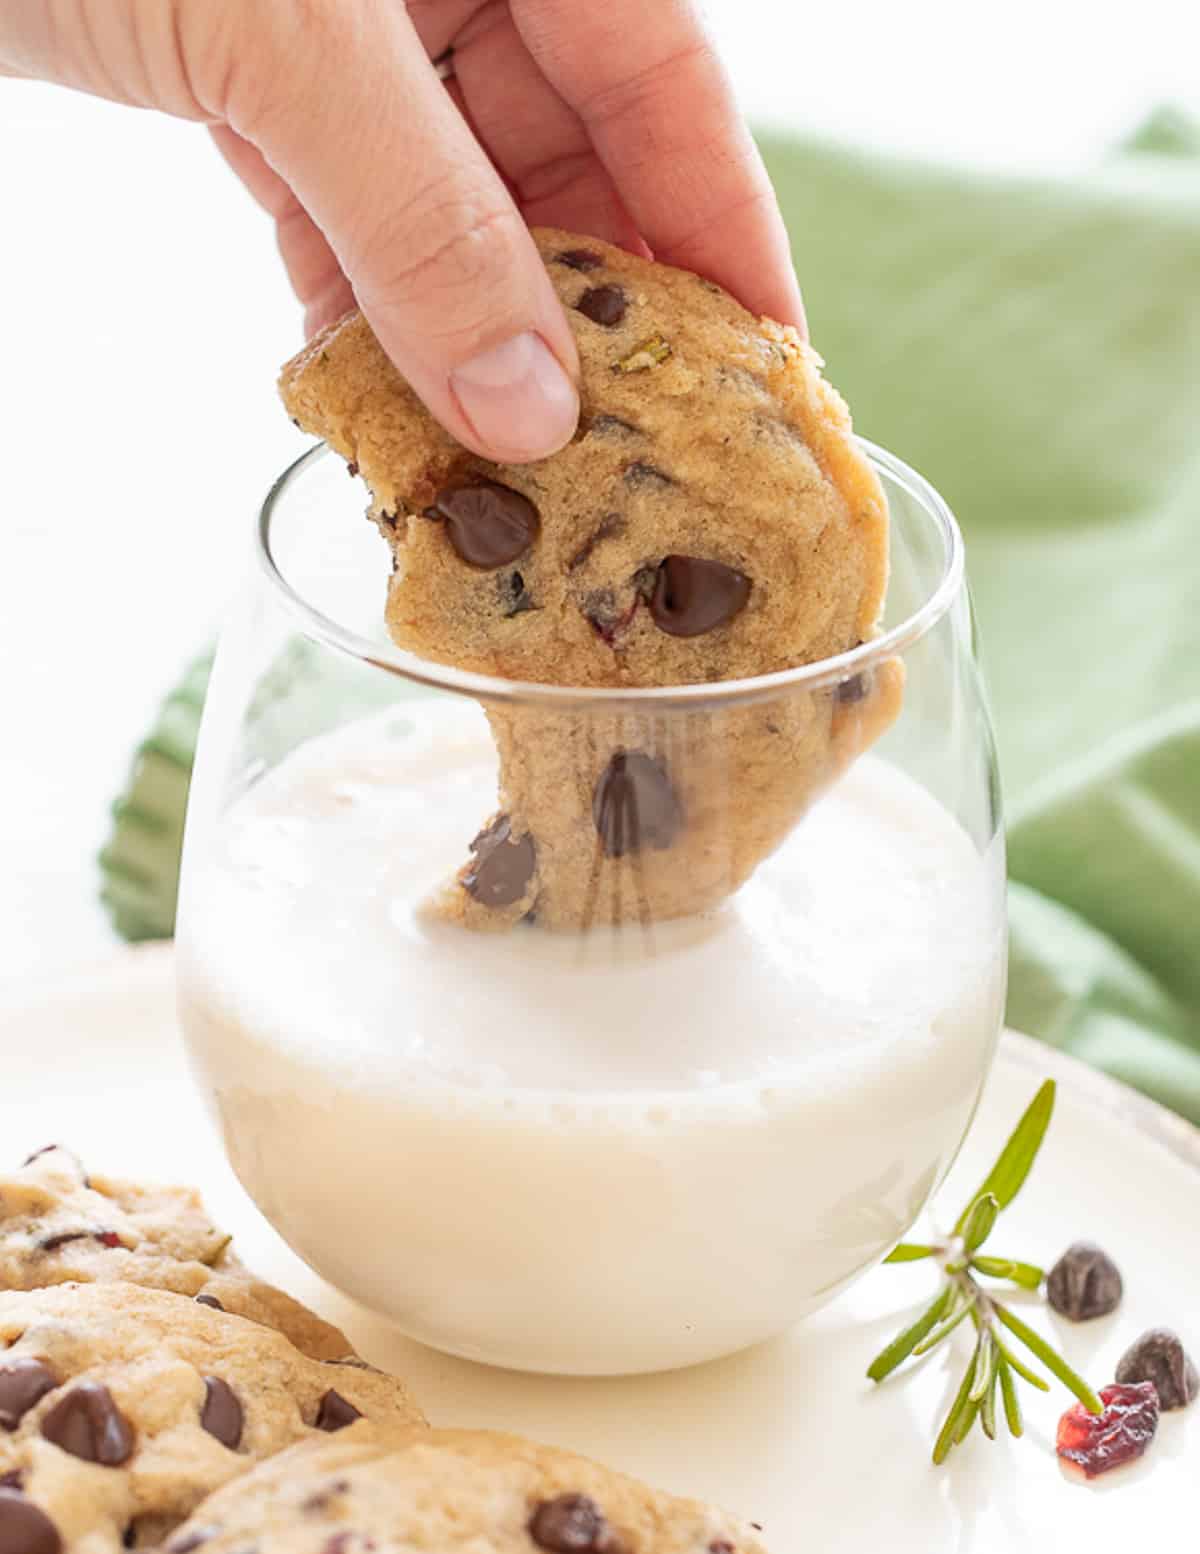 a cookie being dipped in a glass of almond milk